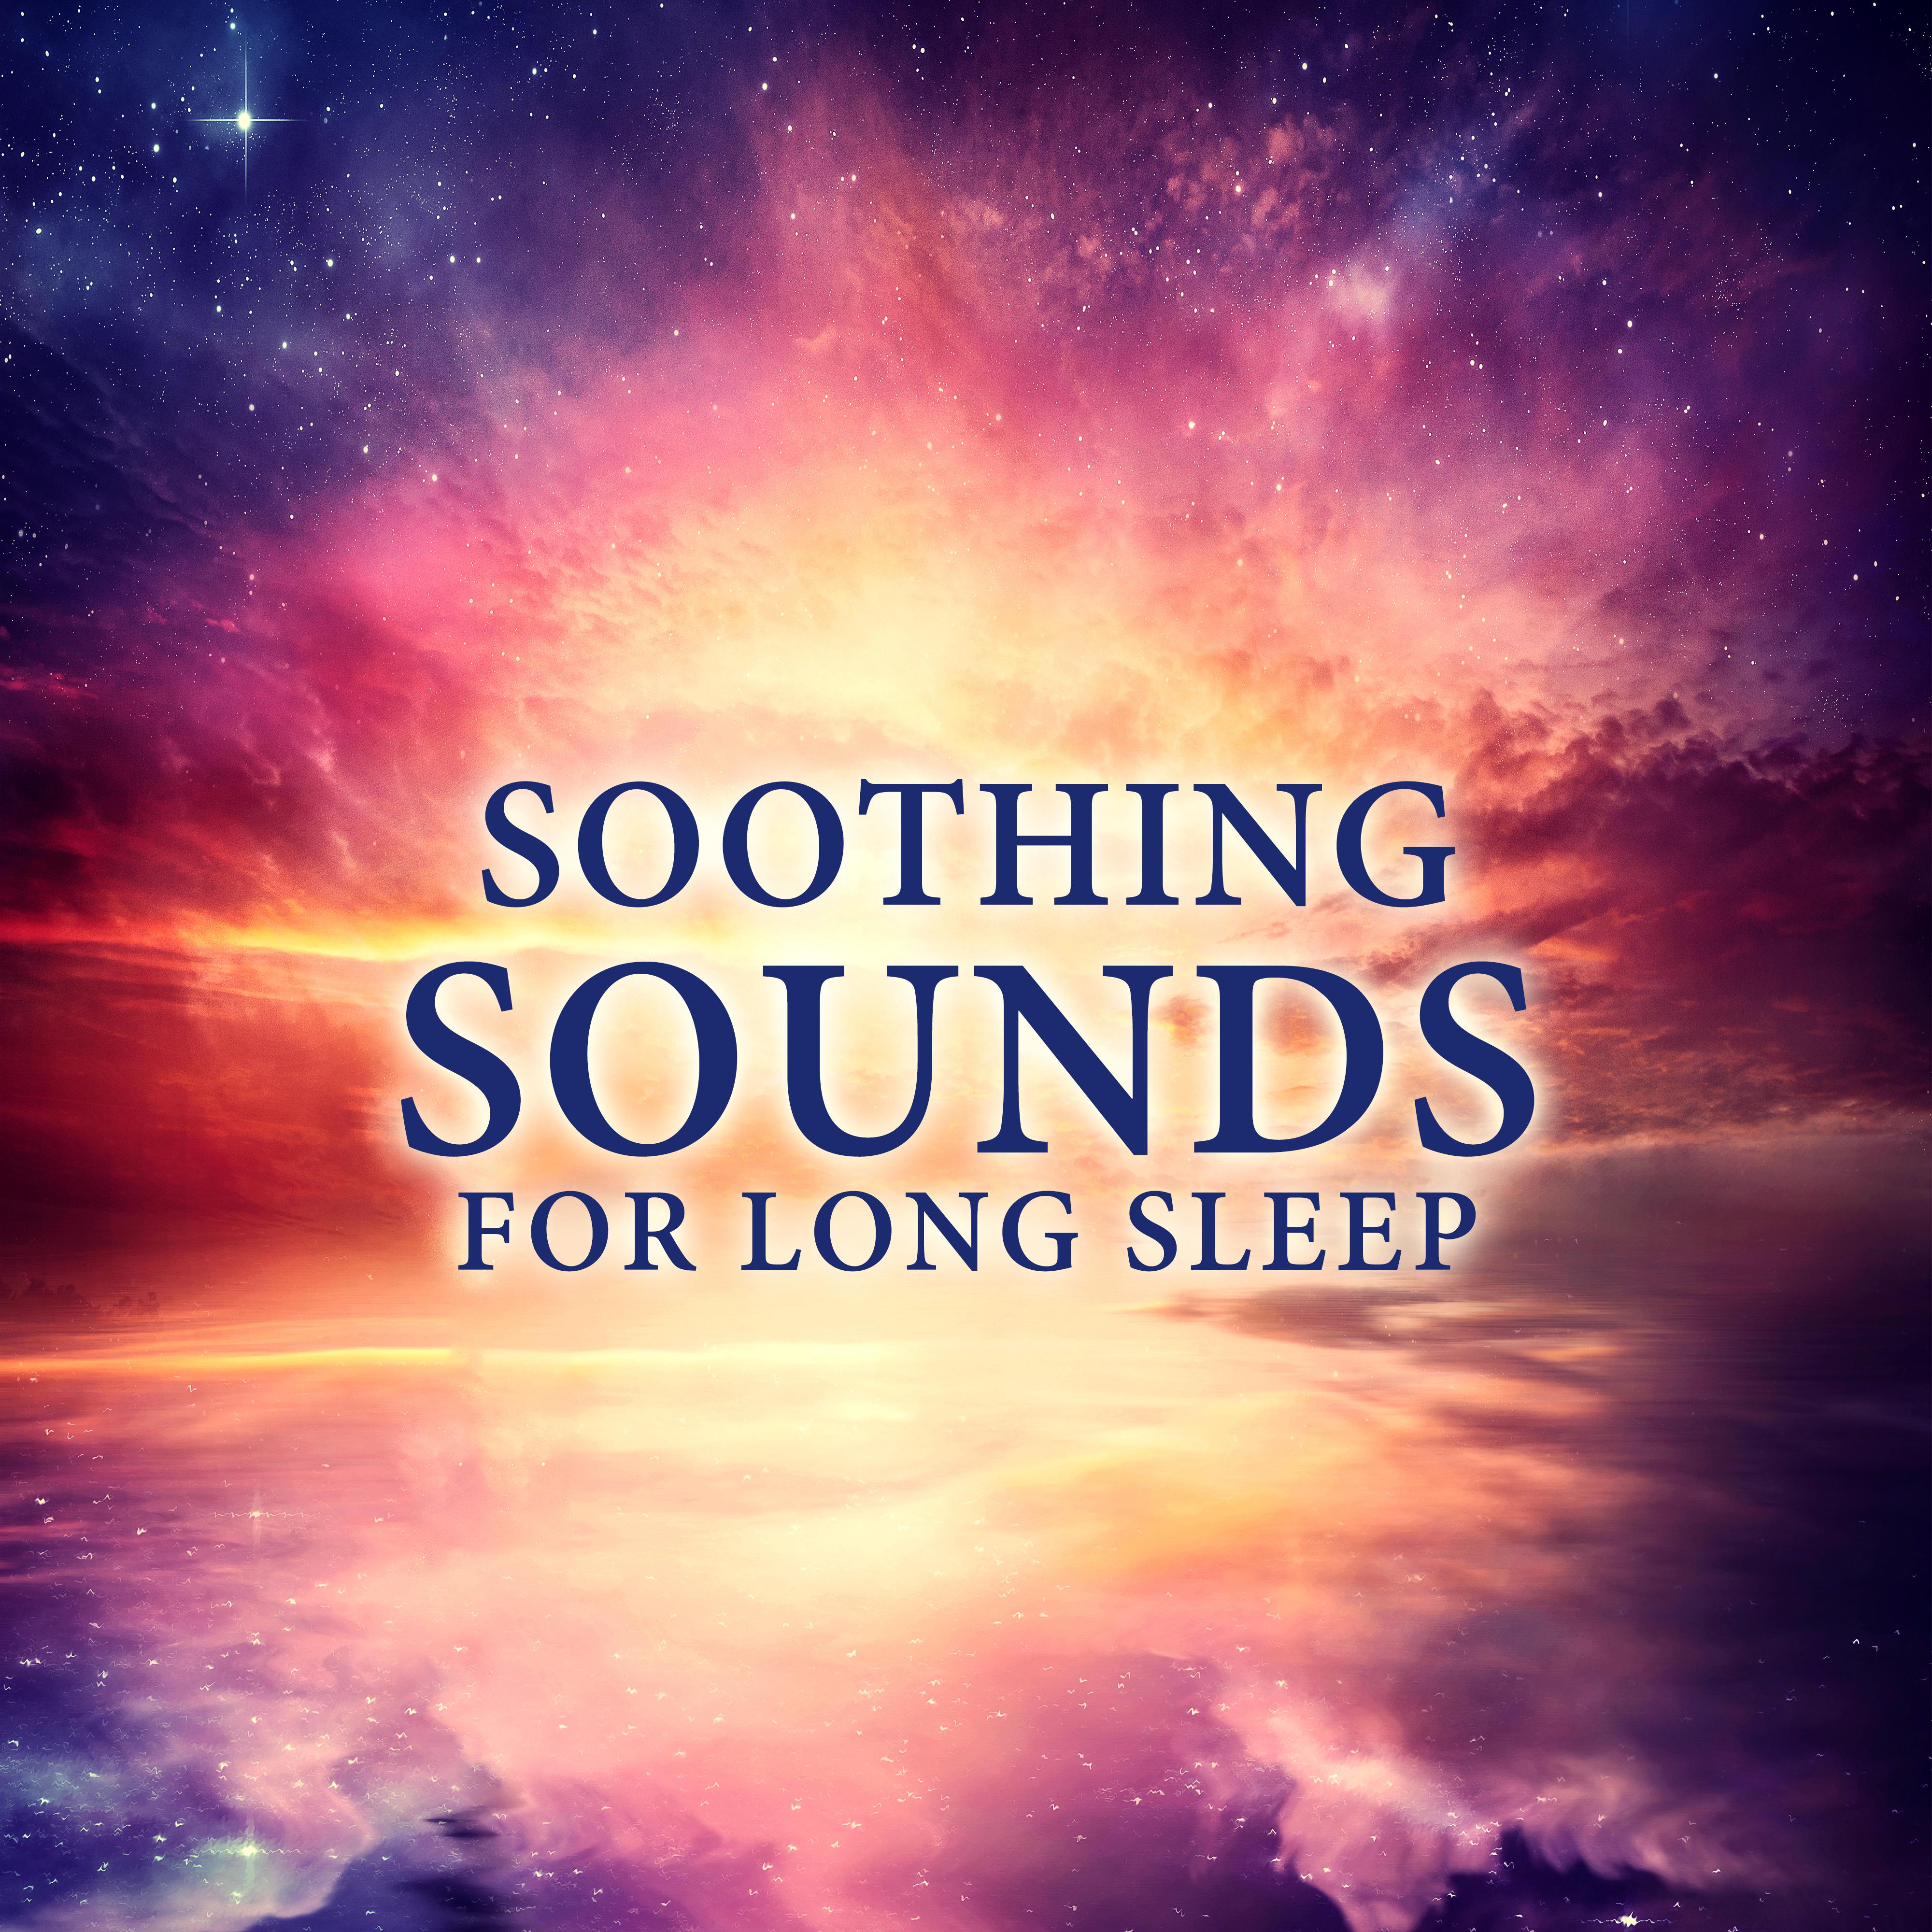 Soothing Sounds for Long Sleep  Relaxing Time, Melodies to Fall Asleep, Rest with New Age Music, Mind Rest